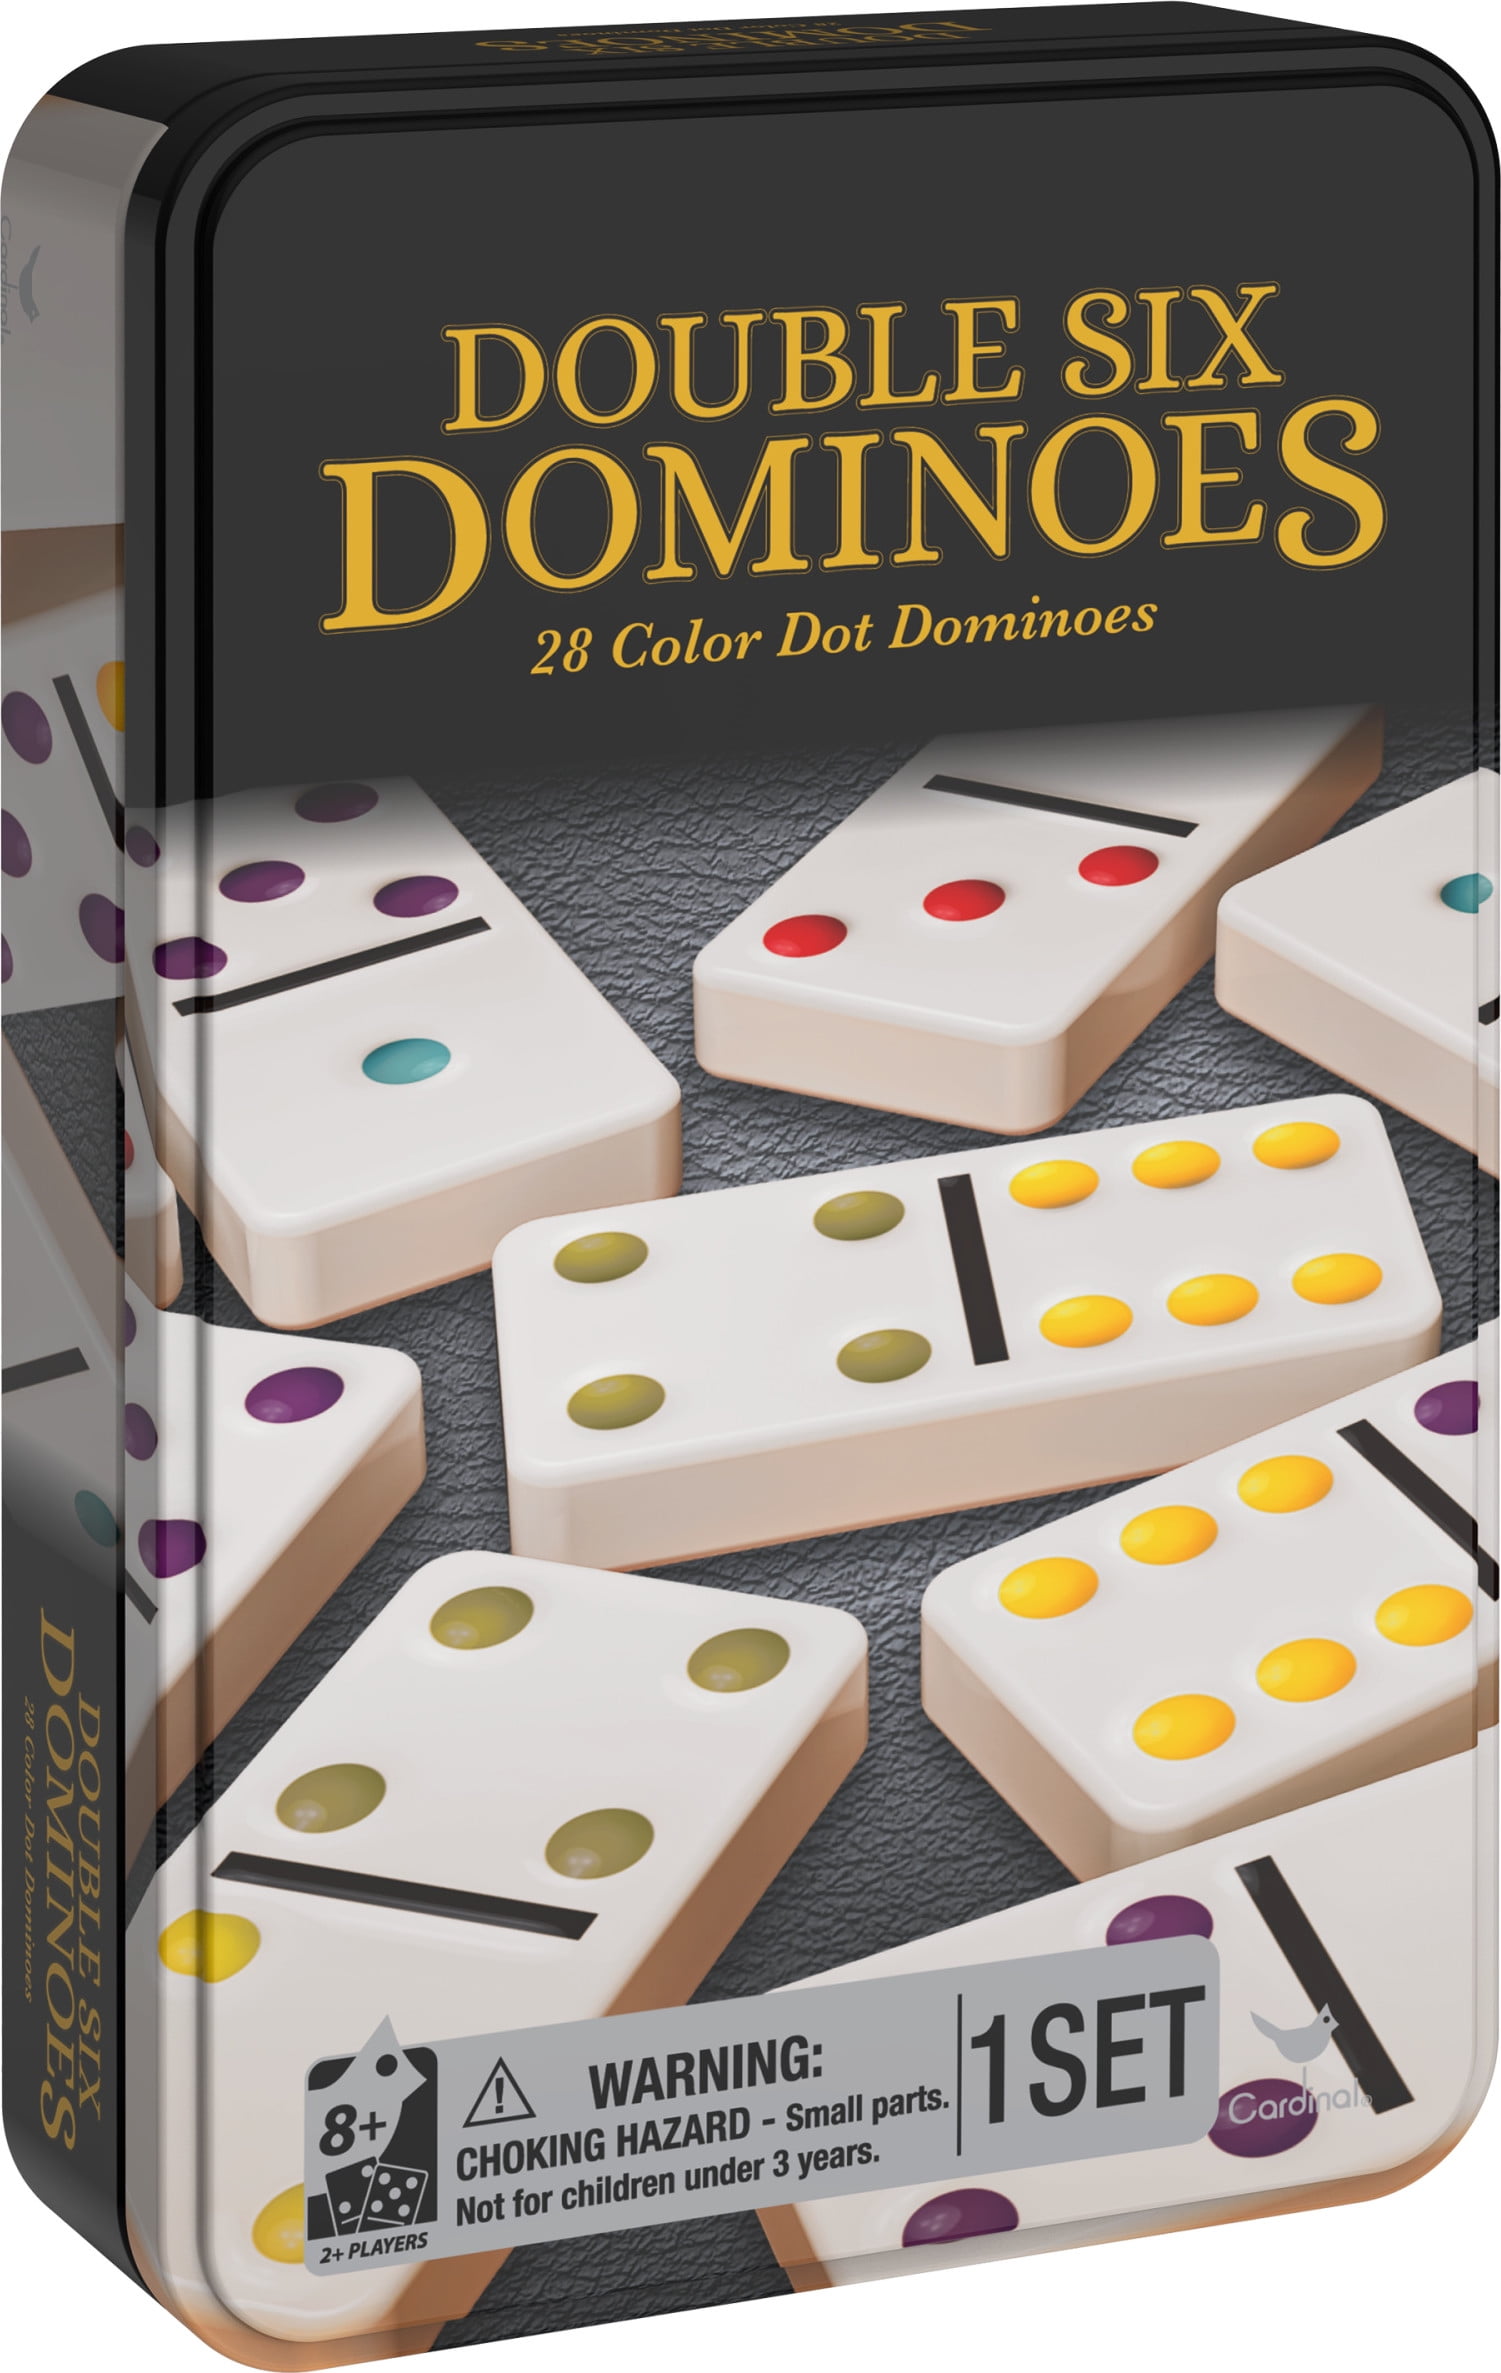 Double Six Dominoes Set of 28 Color Dots Comes In Tin Box 